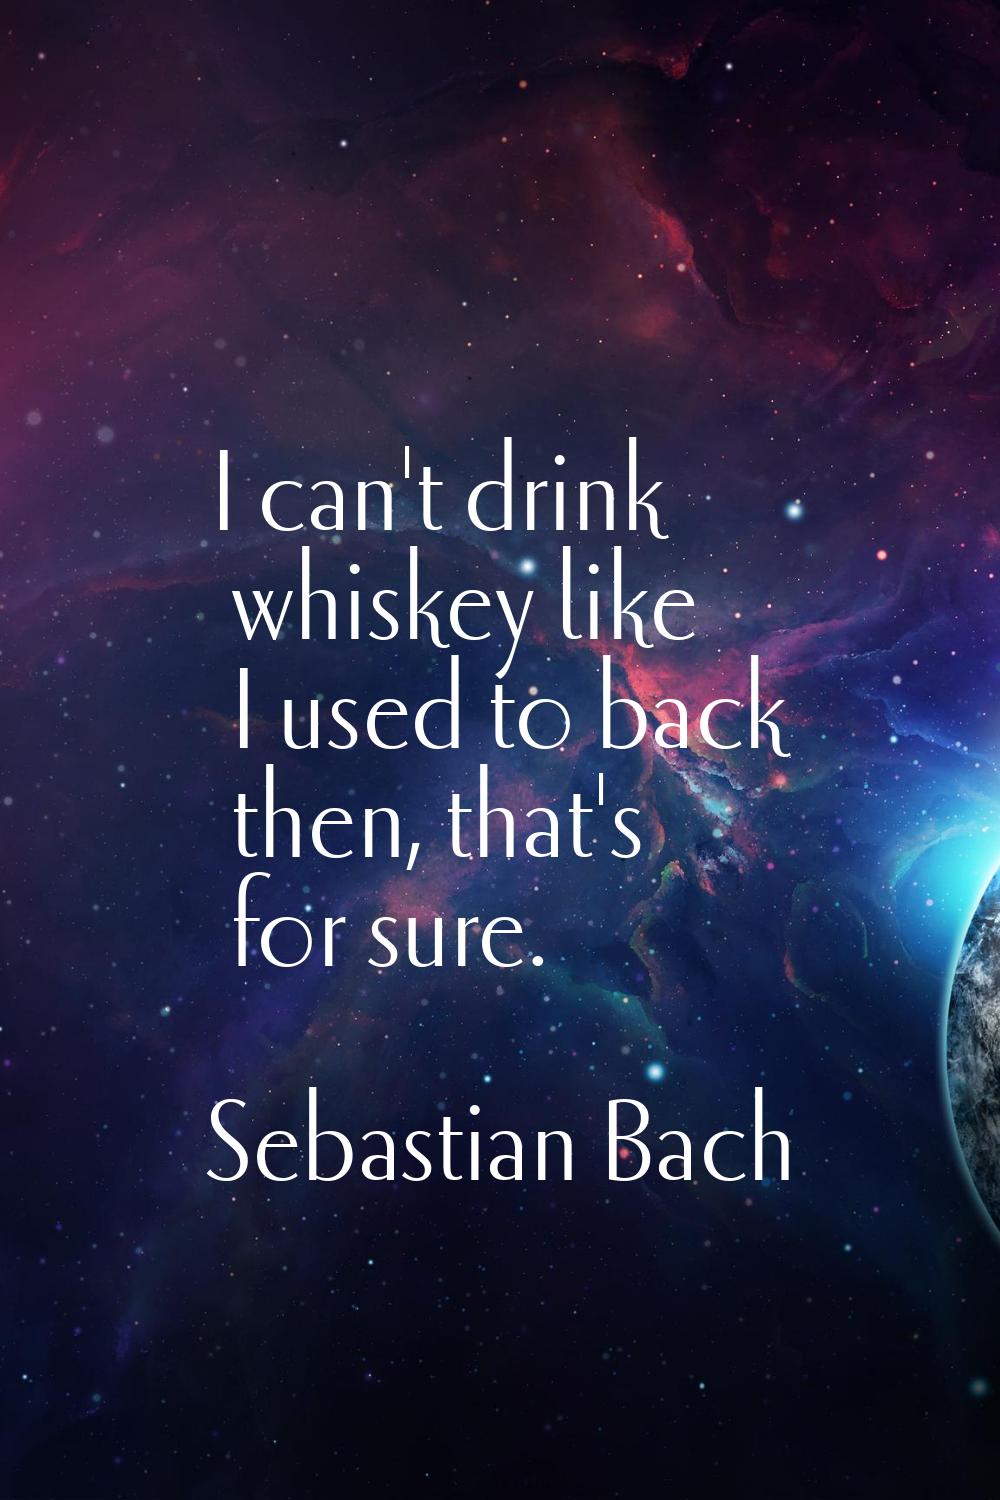 I can't drink whiskey like I used to back then, that's for sure.